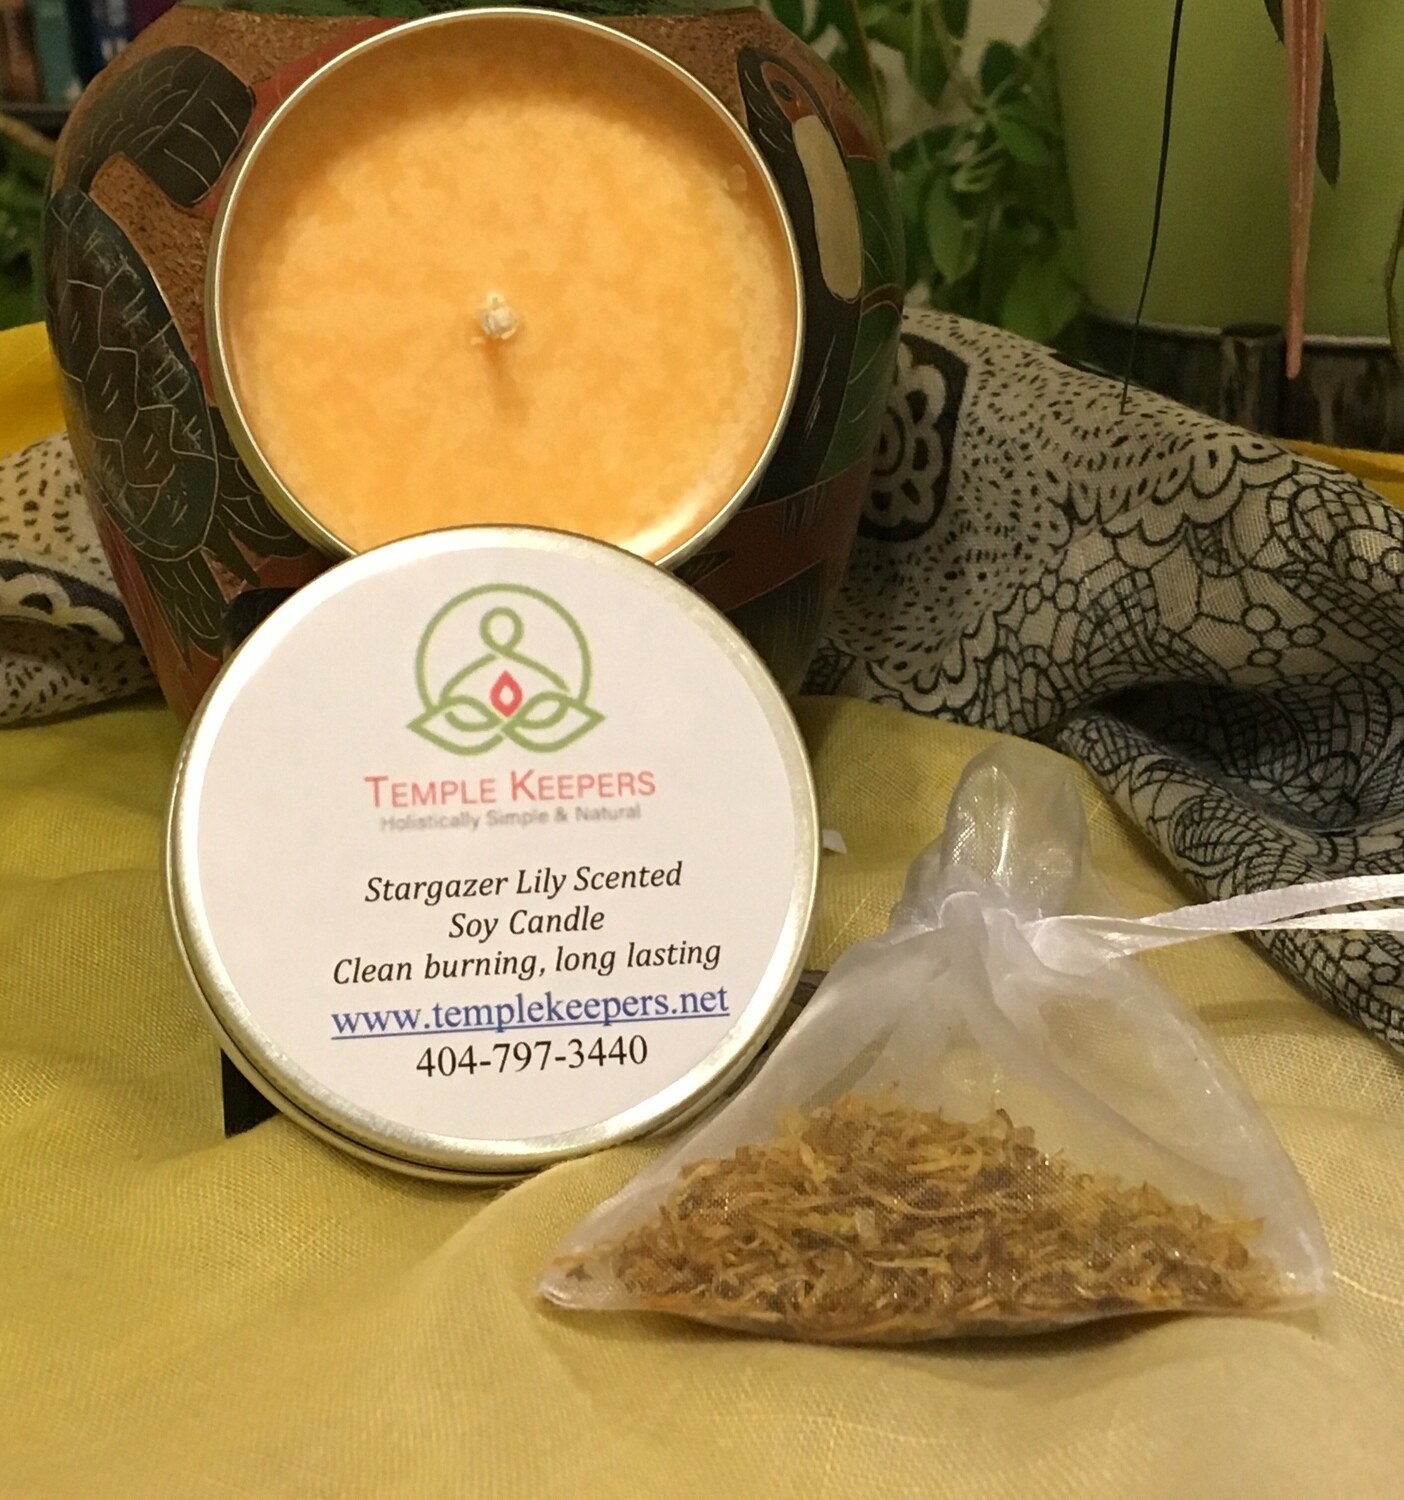 Soy Candles - 2 oz.  Hand-poured and Non-toxic